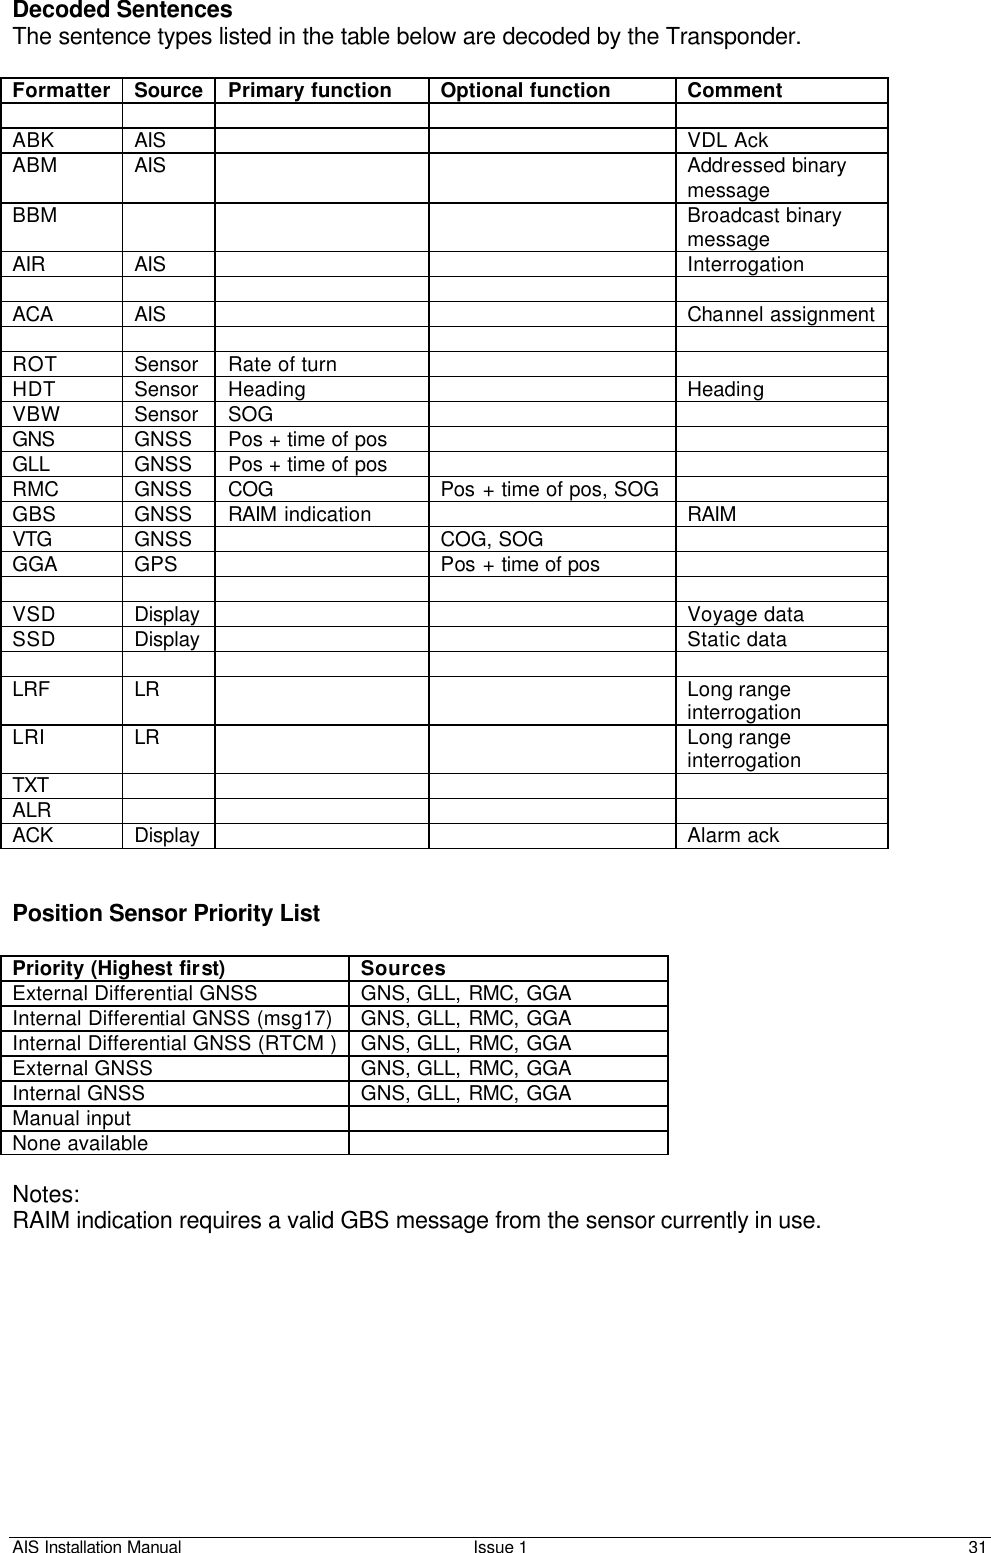 AIS Installation Manual Issue 1 31     Decoded Sentences The sentence types listed in the table below are decoded by the Transponder.  Formatter Source Primary function Optional function Comment          ABK AIS      VDL Ack ABM AIS      Addressed binary message BBM        Broadcast binary message AIR AIS      Interrogation          ACA AIS      Channel assignment          ROT Sensor Rate of turn     HDT Sensor Heading    Heading VBW Sensor SOG     GNS GNSS Pos + time of pos     GLL GNSS Pos + time of pos     RMC GNSS COG Pos + time of pos, SOG   GBS GNSS RAIM indication    RAIM VTG GNSS    COG, SOG   GGA GPS    Pos + time of pos            VSD Display      Voyage data SSD Display      Static data          LRF LR      Long range interrogation LRI LR      Long range interrogation TXT         ALR         ACK Display      Alarm ack   Position Sensor Priority List  Priority (Highest first) Sources External Differential GNSS GNS, GLL, RMC, GGA Internal Differential GNSS (msg17) GNS, GLL, RMC, GGA Internal Differential GNSS (RTCM ) GNS, GLL, RMC, GGA External GNSS GNS, GLL, RMC, GGA Internal GNSS GNS, GLL, RMC, GGA Manual input    None available    Notes: RAIM indication requires a valid GBS message from the sensor currently in use.  